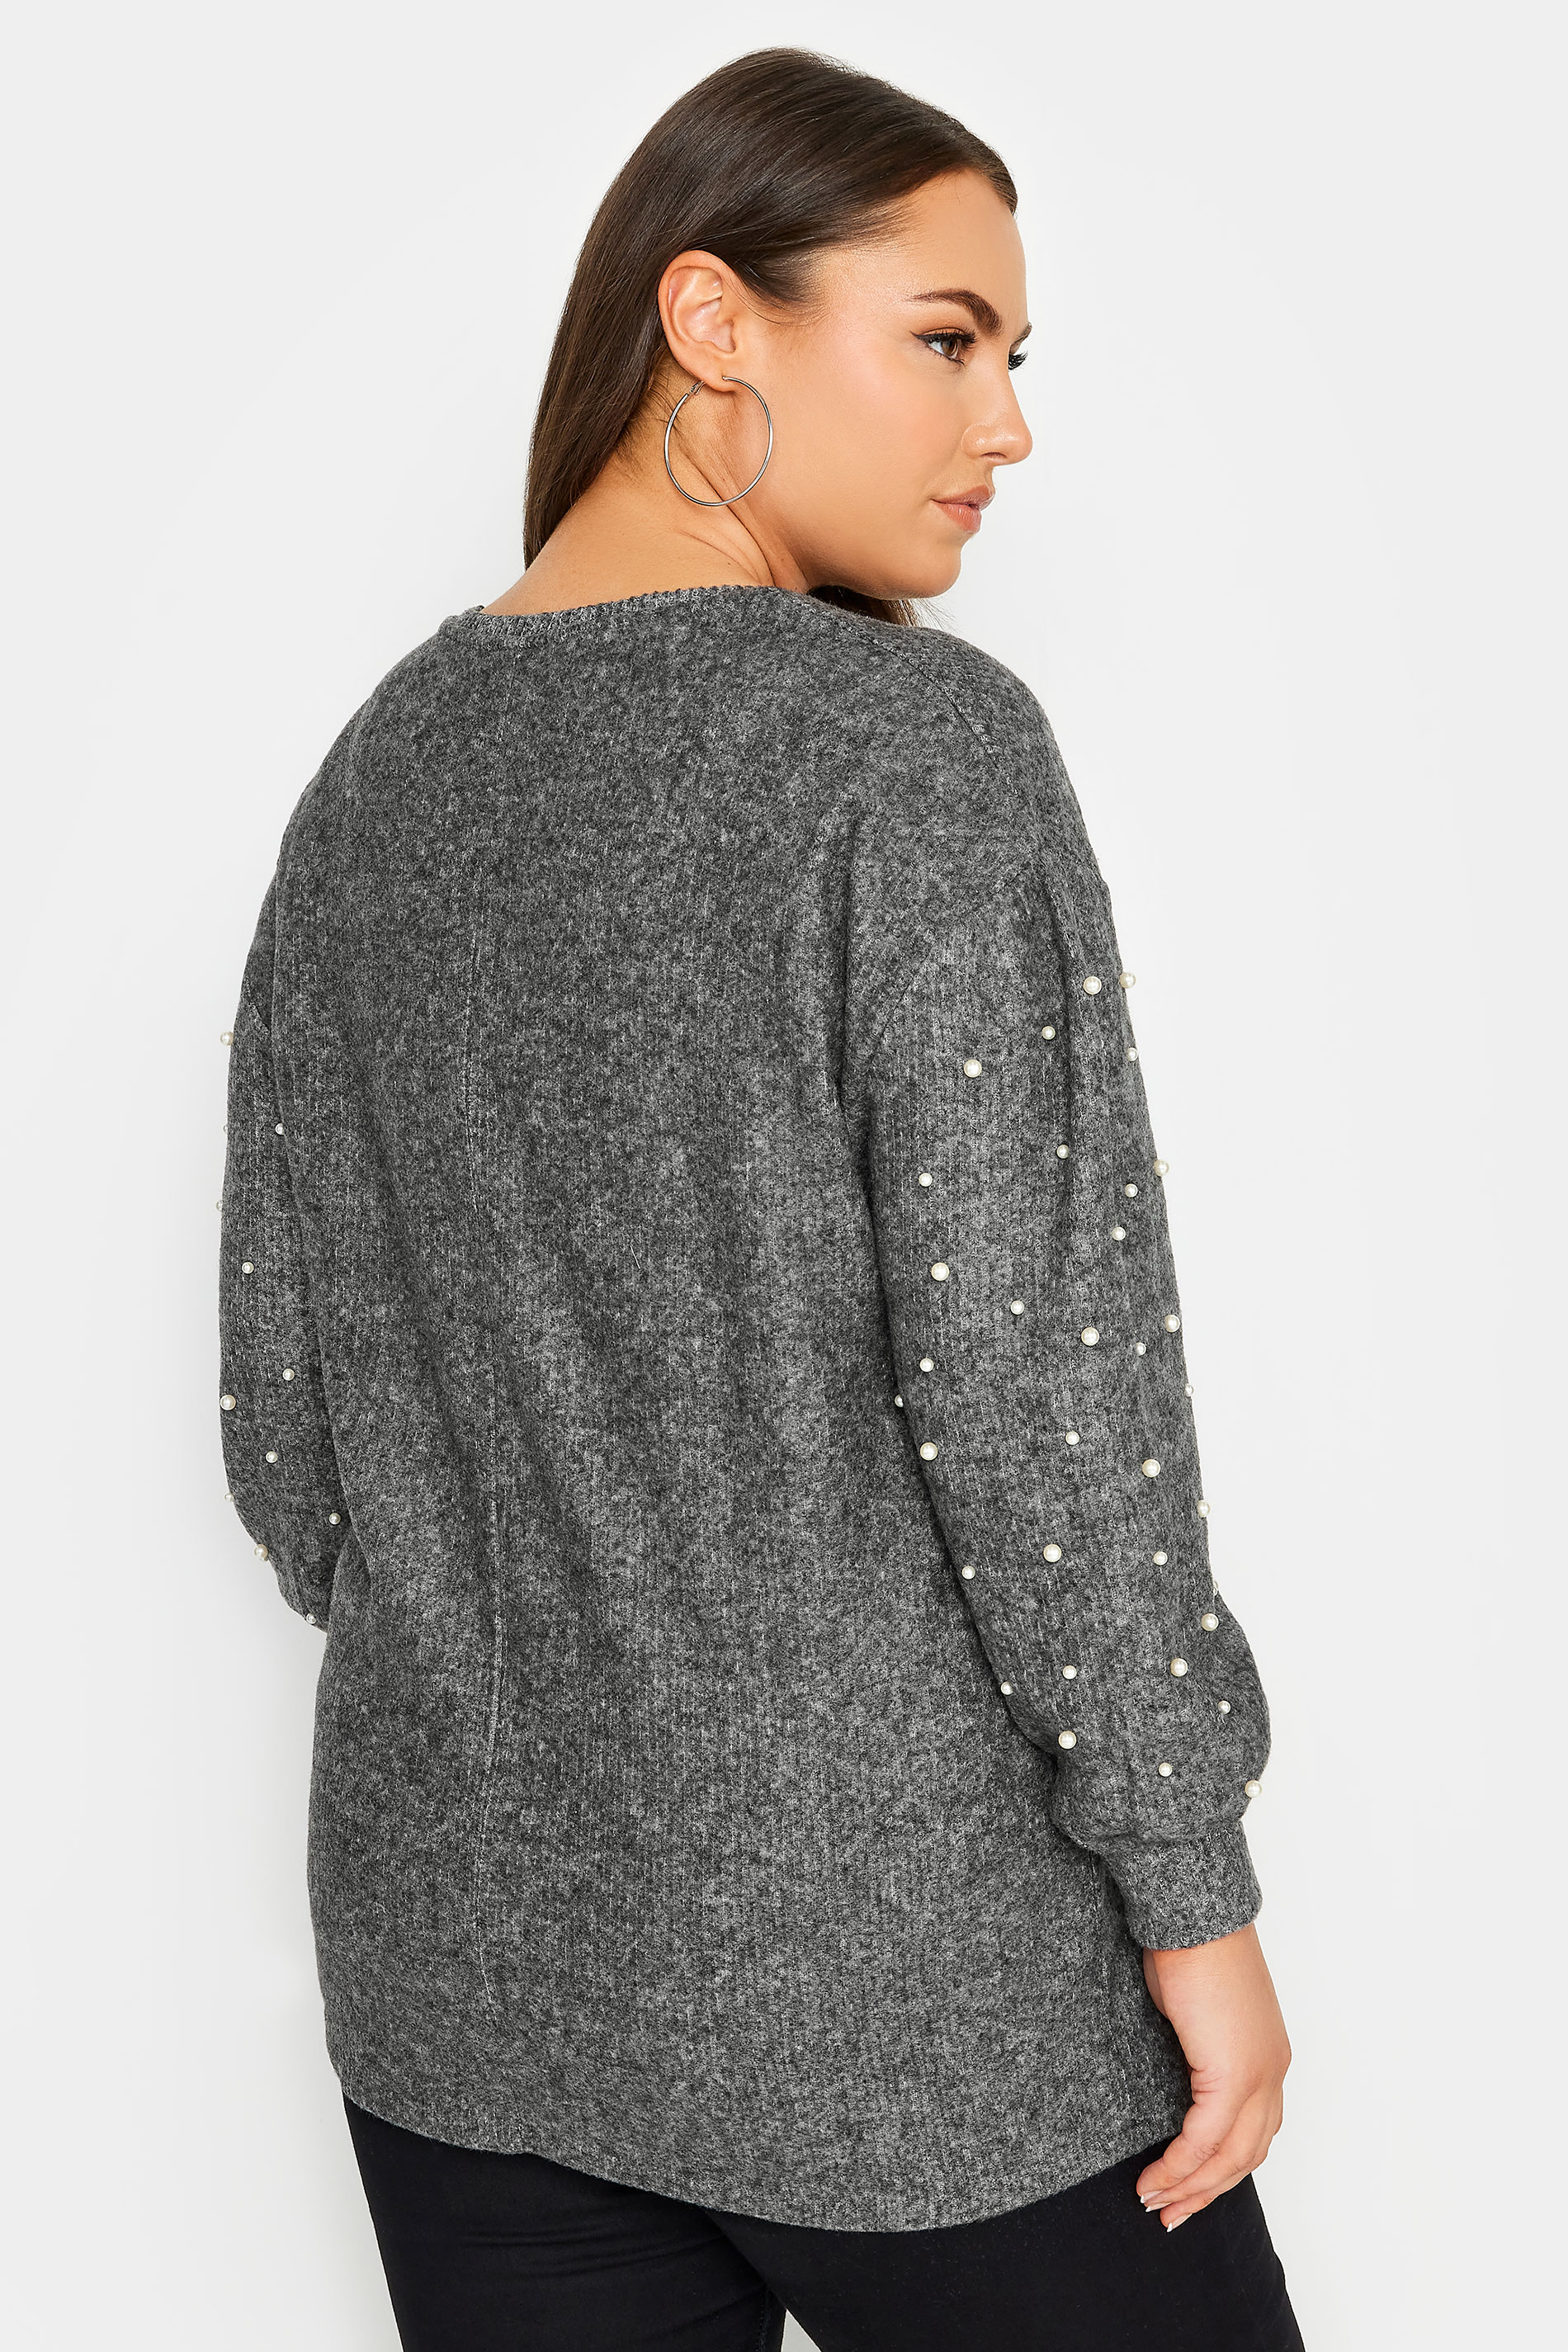 YOURS Plus Size Grey Pearl Embellished Soft Touch Sweatshirt | Yours Clothing 3